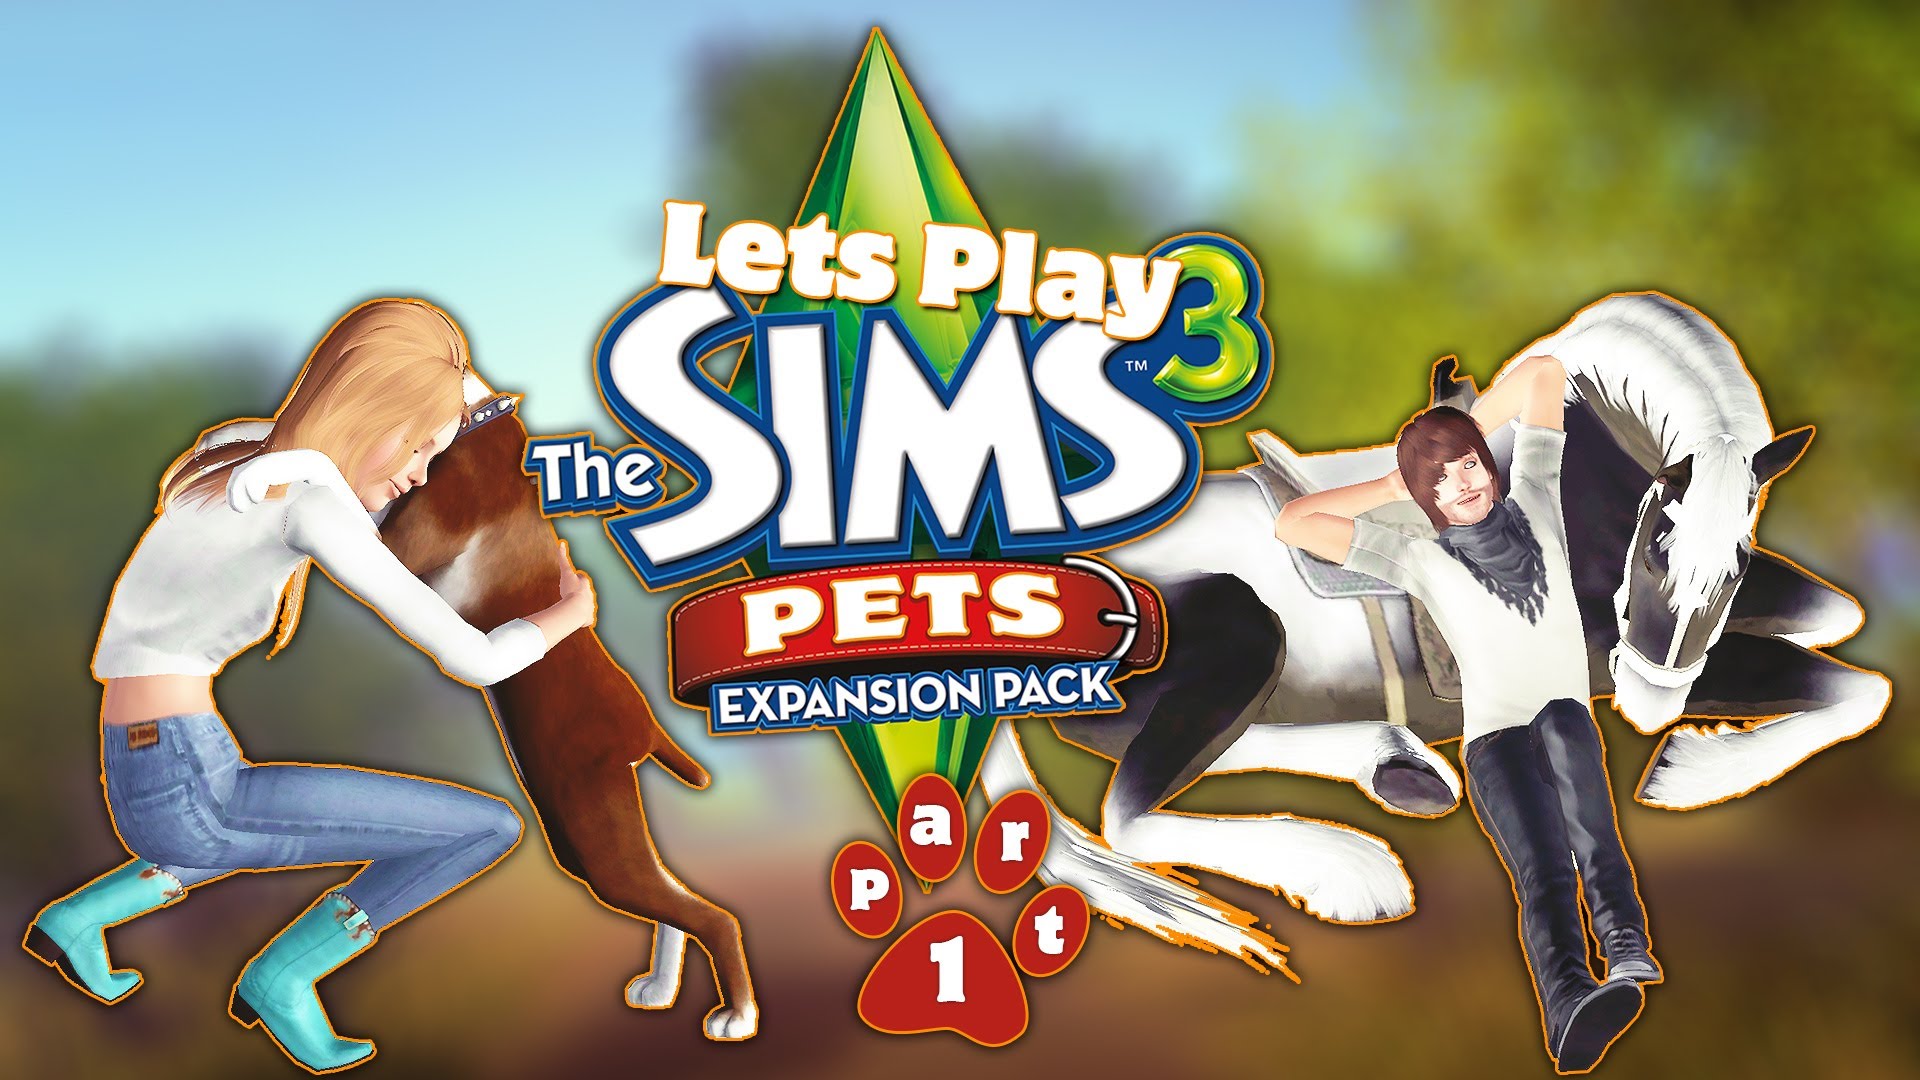 sims 3 pets download pc